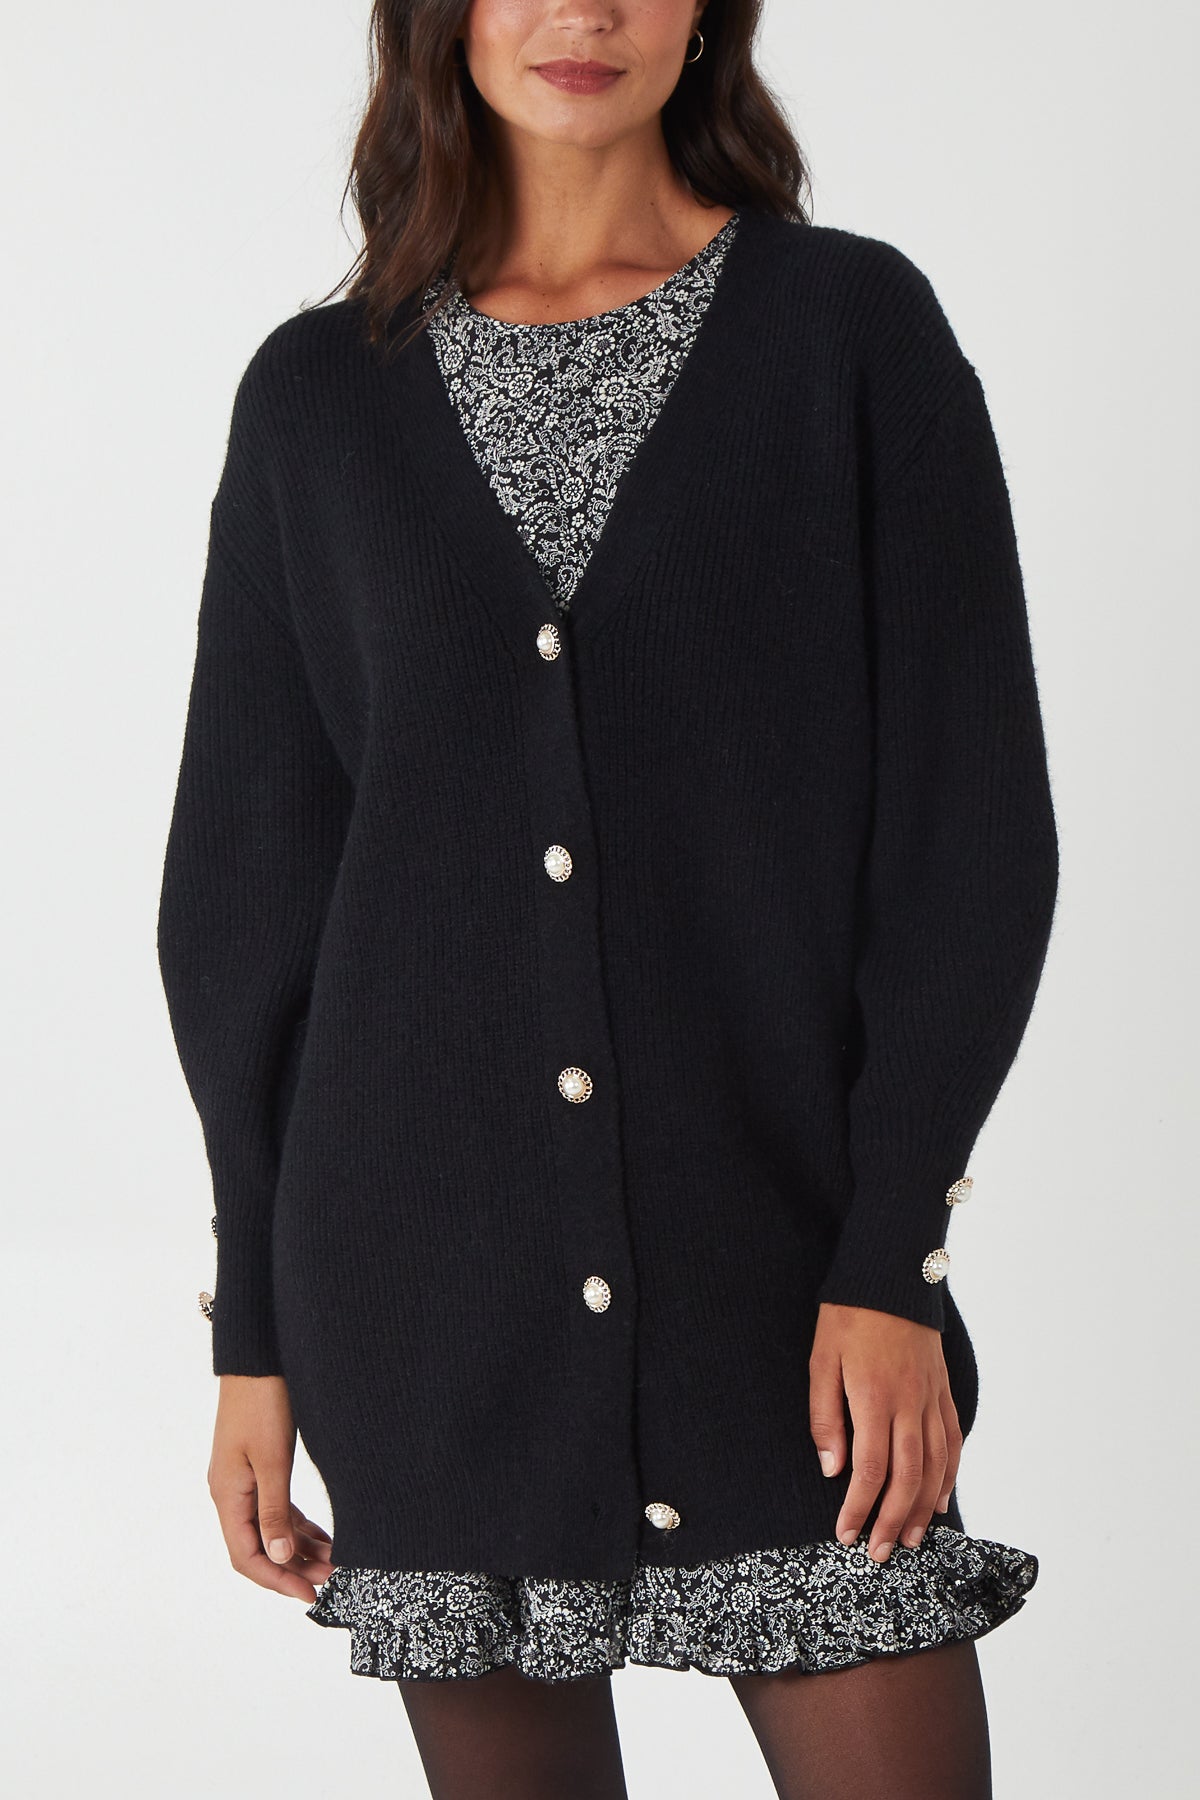 Pearl Button Long Line Cardigan